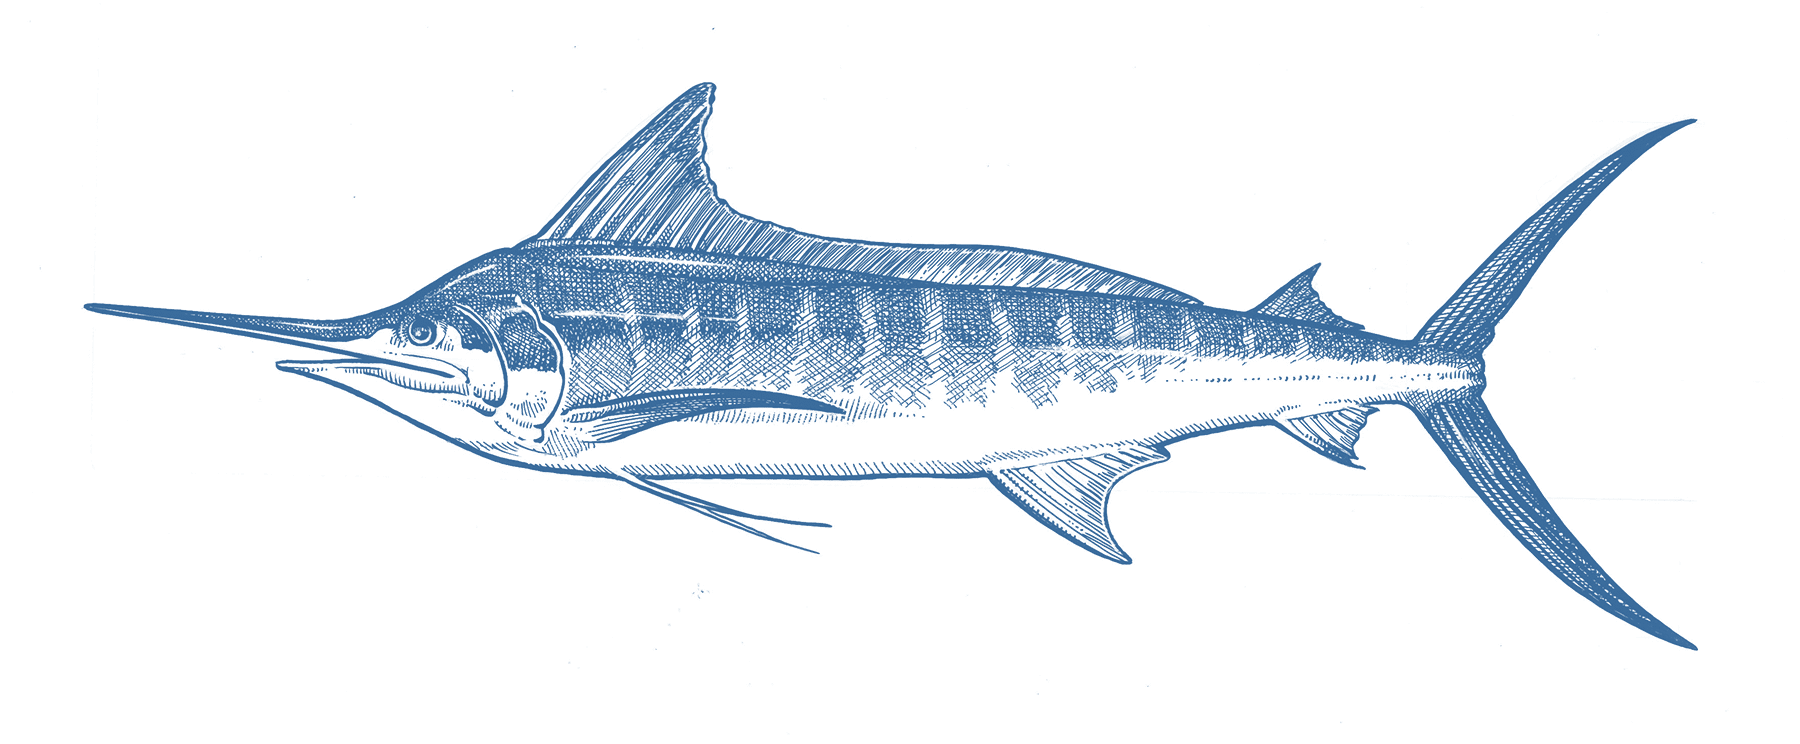 How to Catch Striped Marlin - Tips for Fishing For Striped Marlin